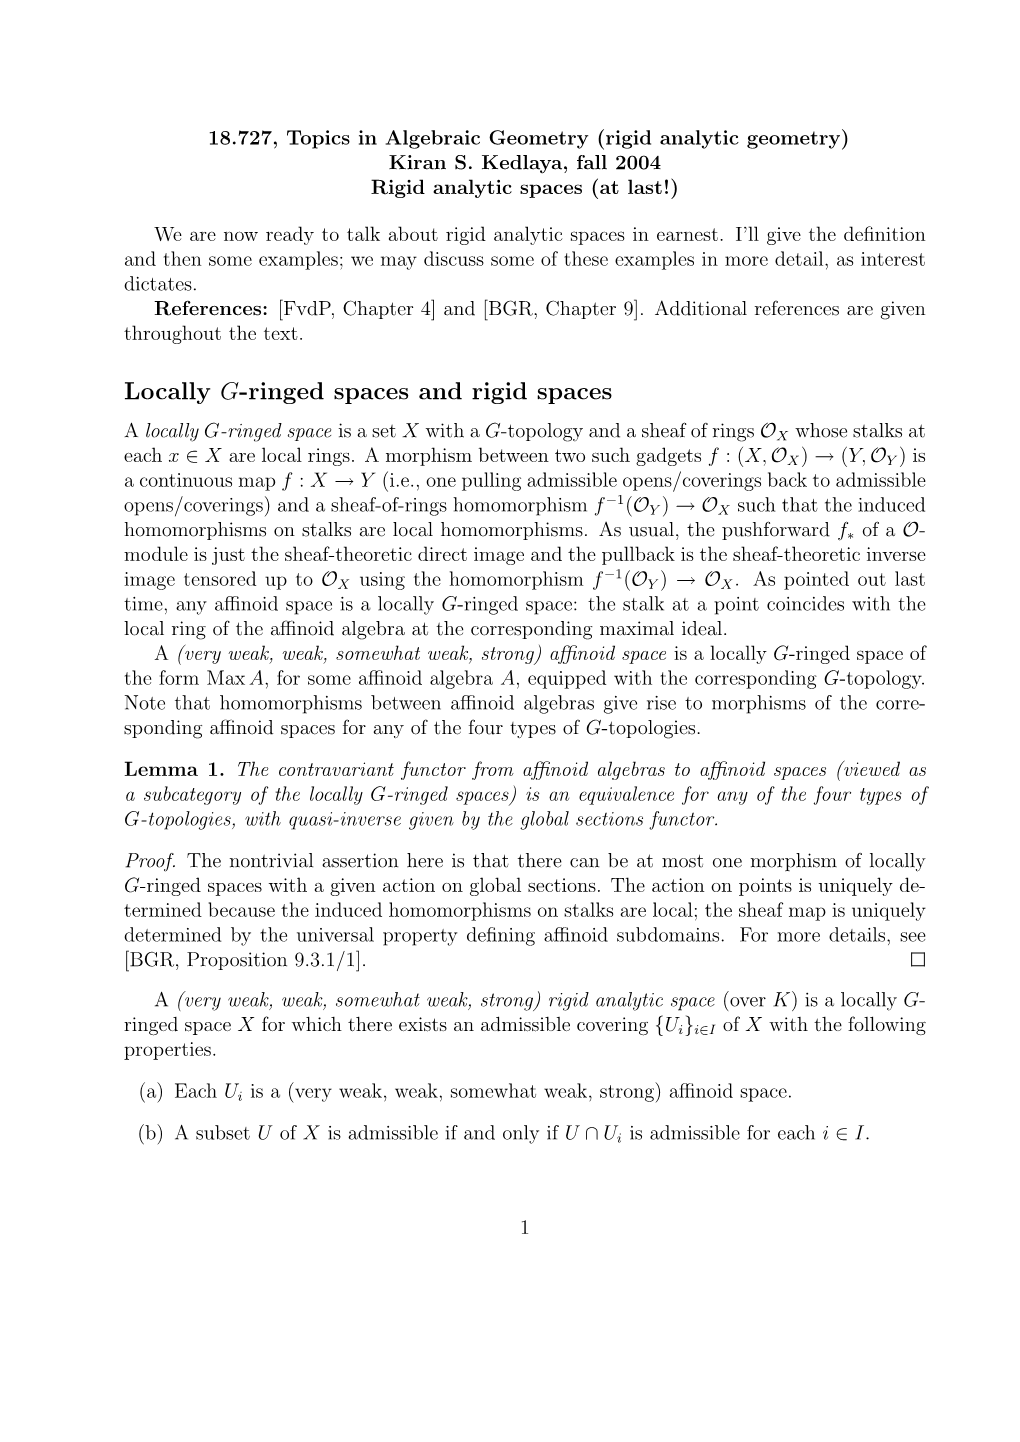 Locally G-Ringed Spaces and Rigid Spaces